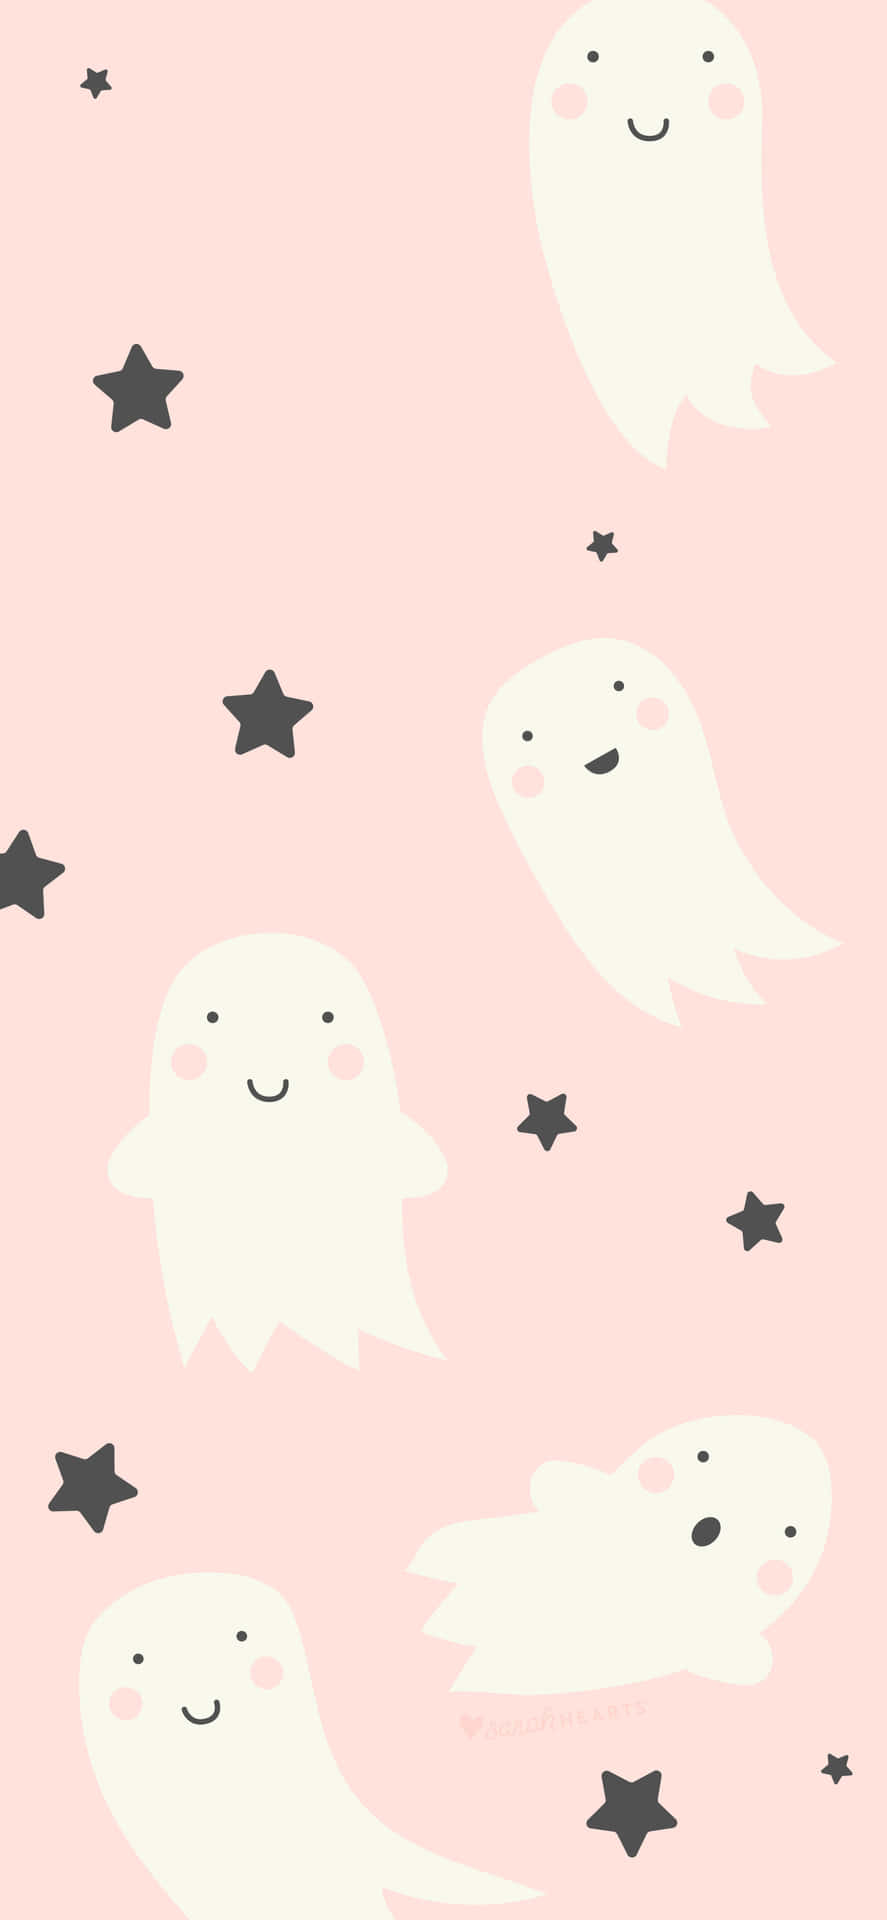 A Cute Ghostly Smiling Face Wallpaper